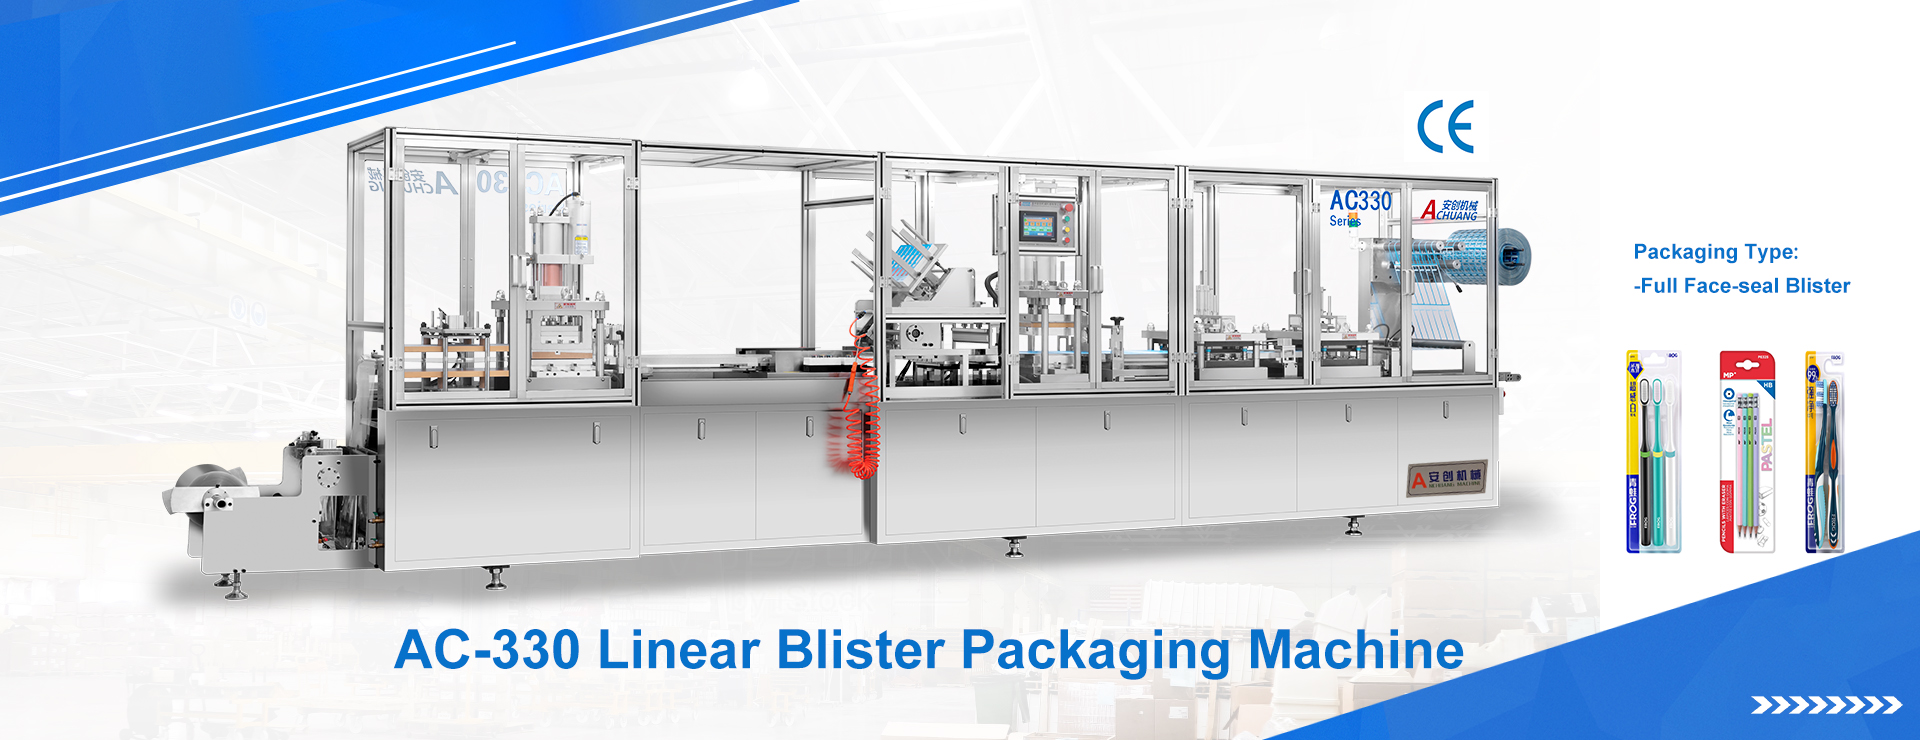 AC-330 FULL FACE SEAL BLISTER PACKING MACHINE